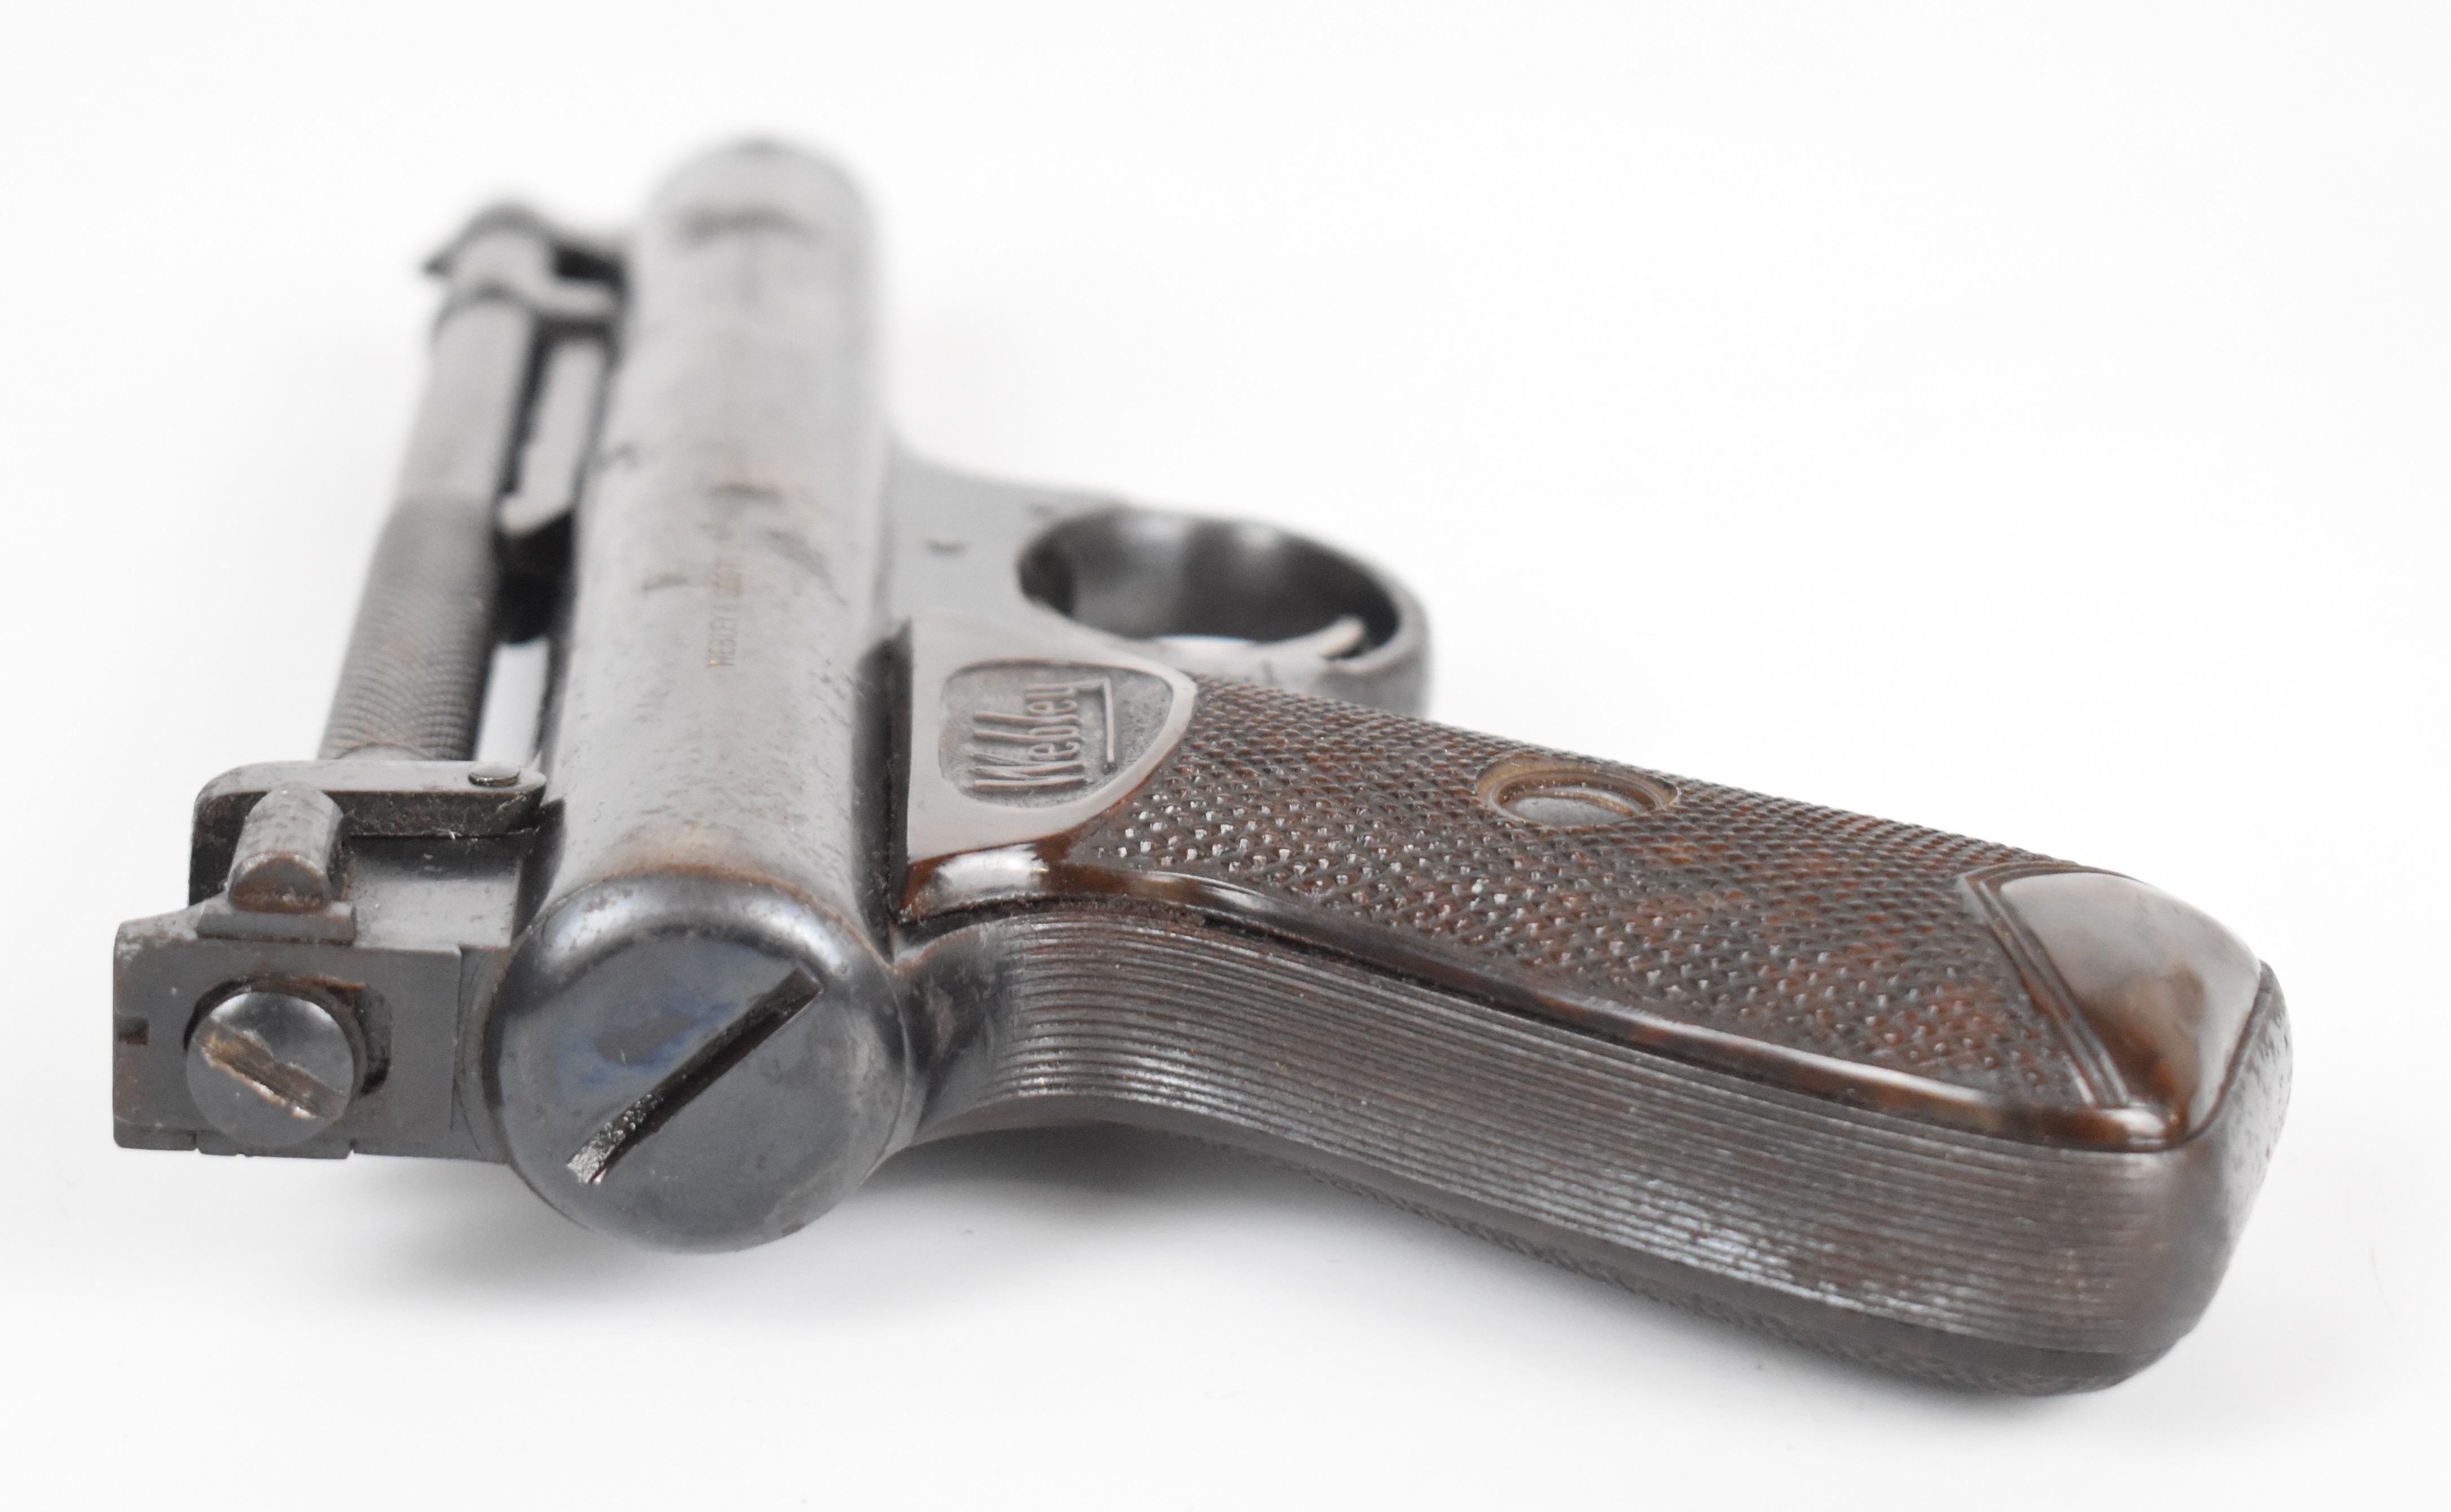 Webley Senior .177 air pistol with named and chequered Bakelite grips and adjustable sights, - Image 3 of 12